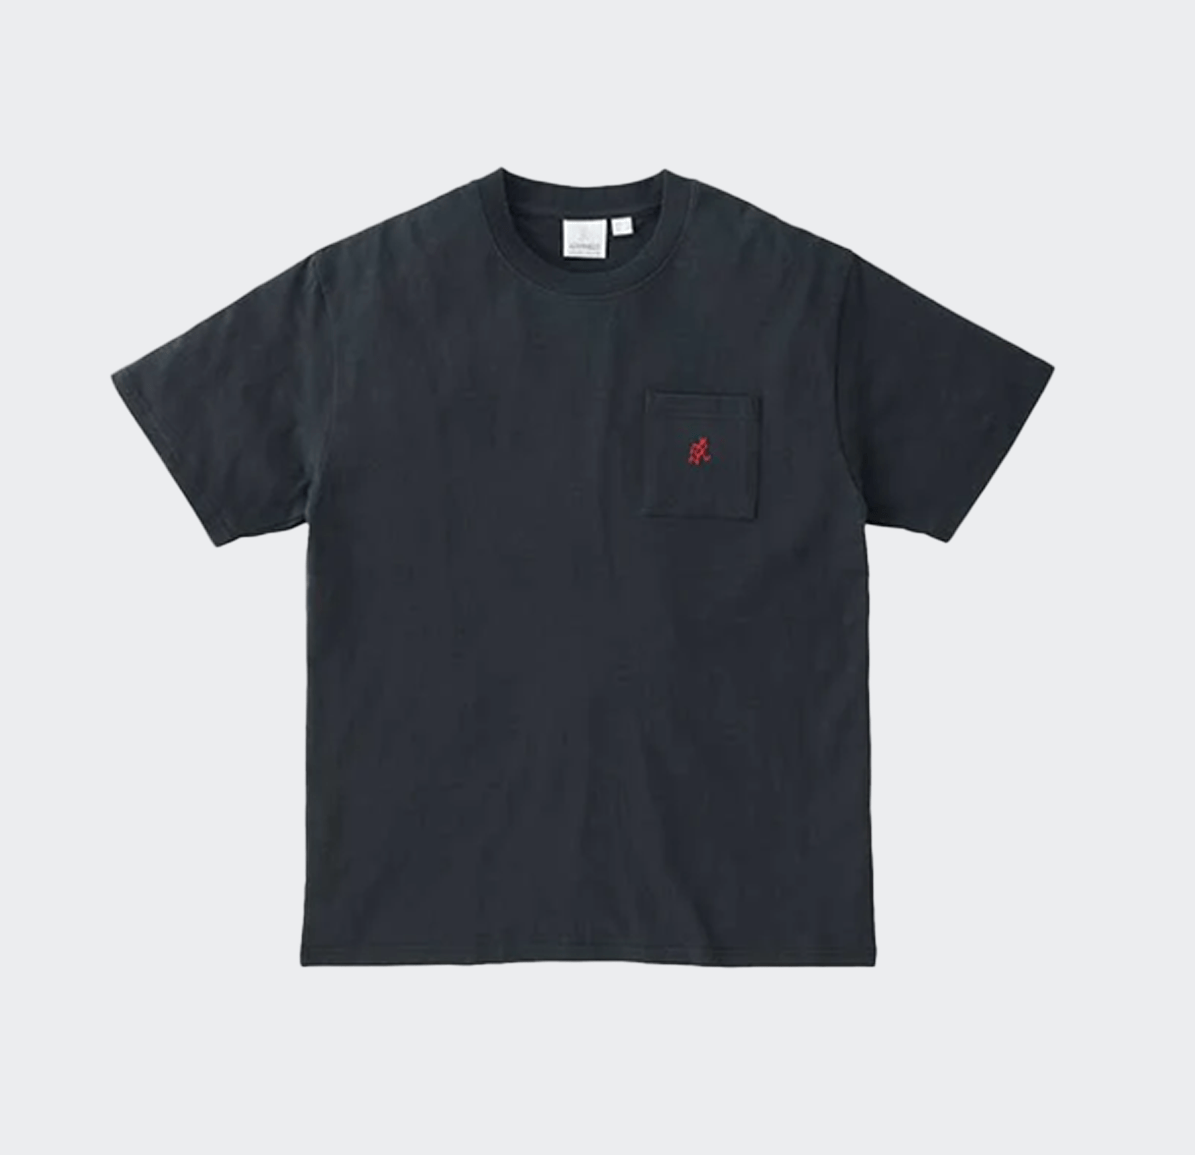 Gramicci Short Sleeve One Point Tee Shirt - Vintage Black - Gramicci - State Of Play